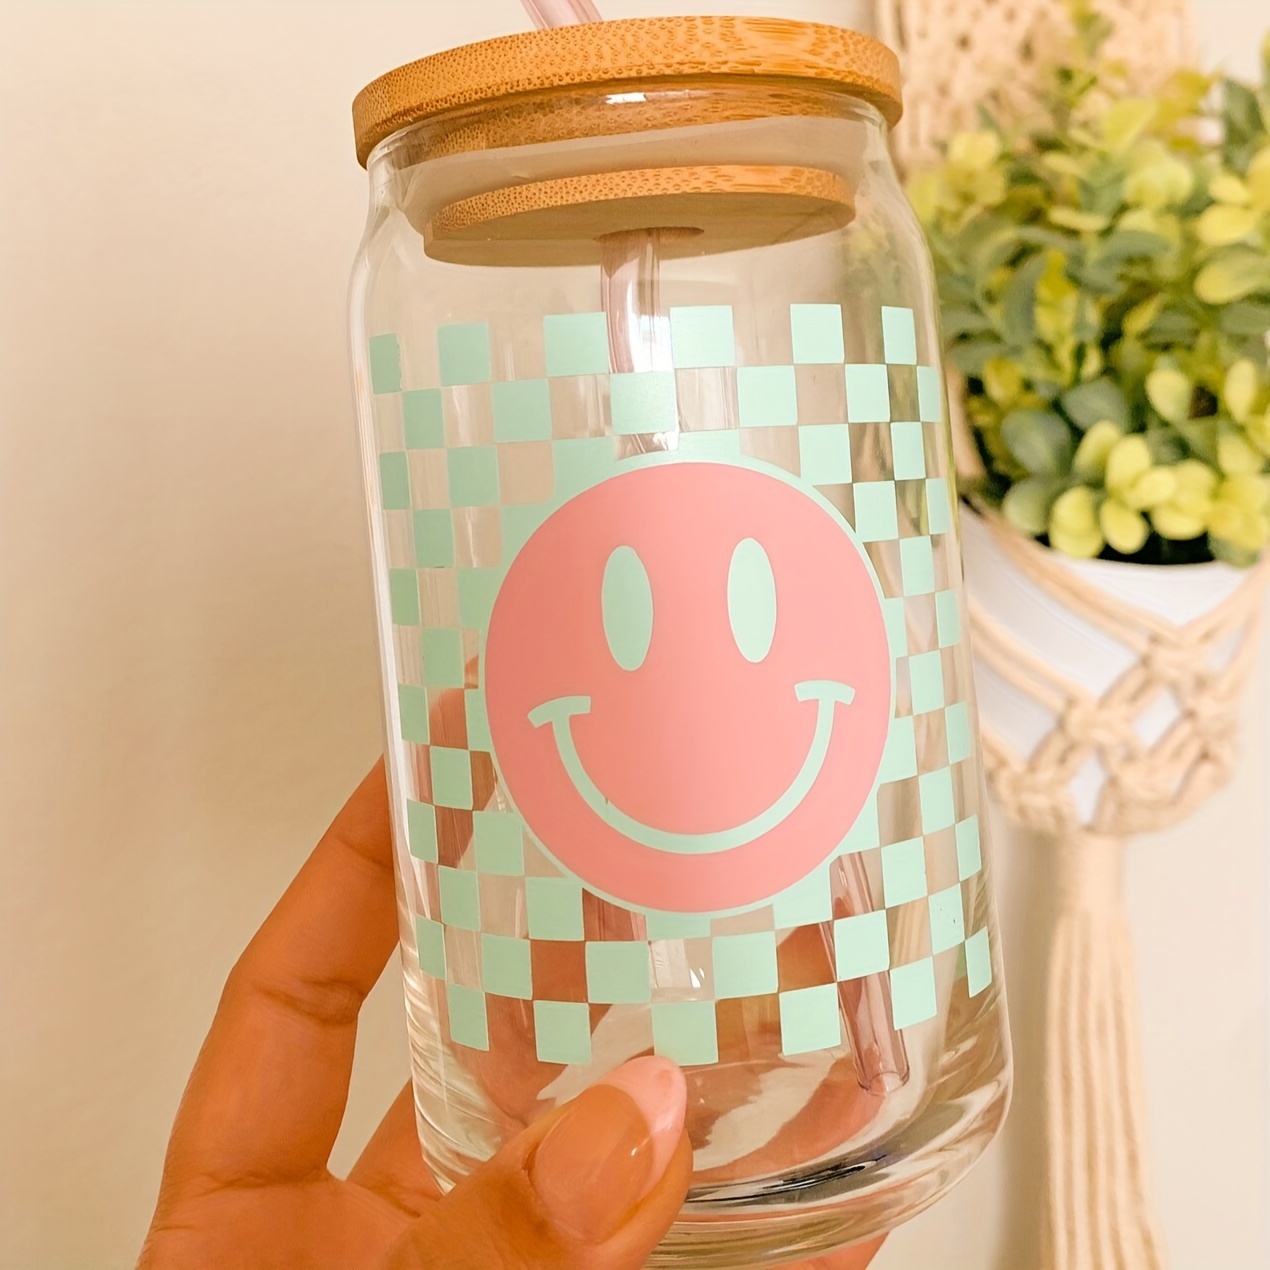 Preppy Beer Can Glasses 16oz Smiling Face Glass Cups with Lids Straws